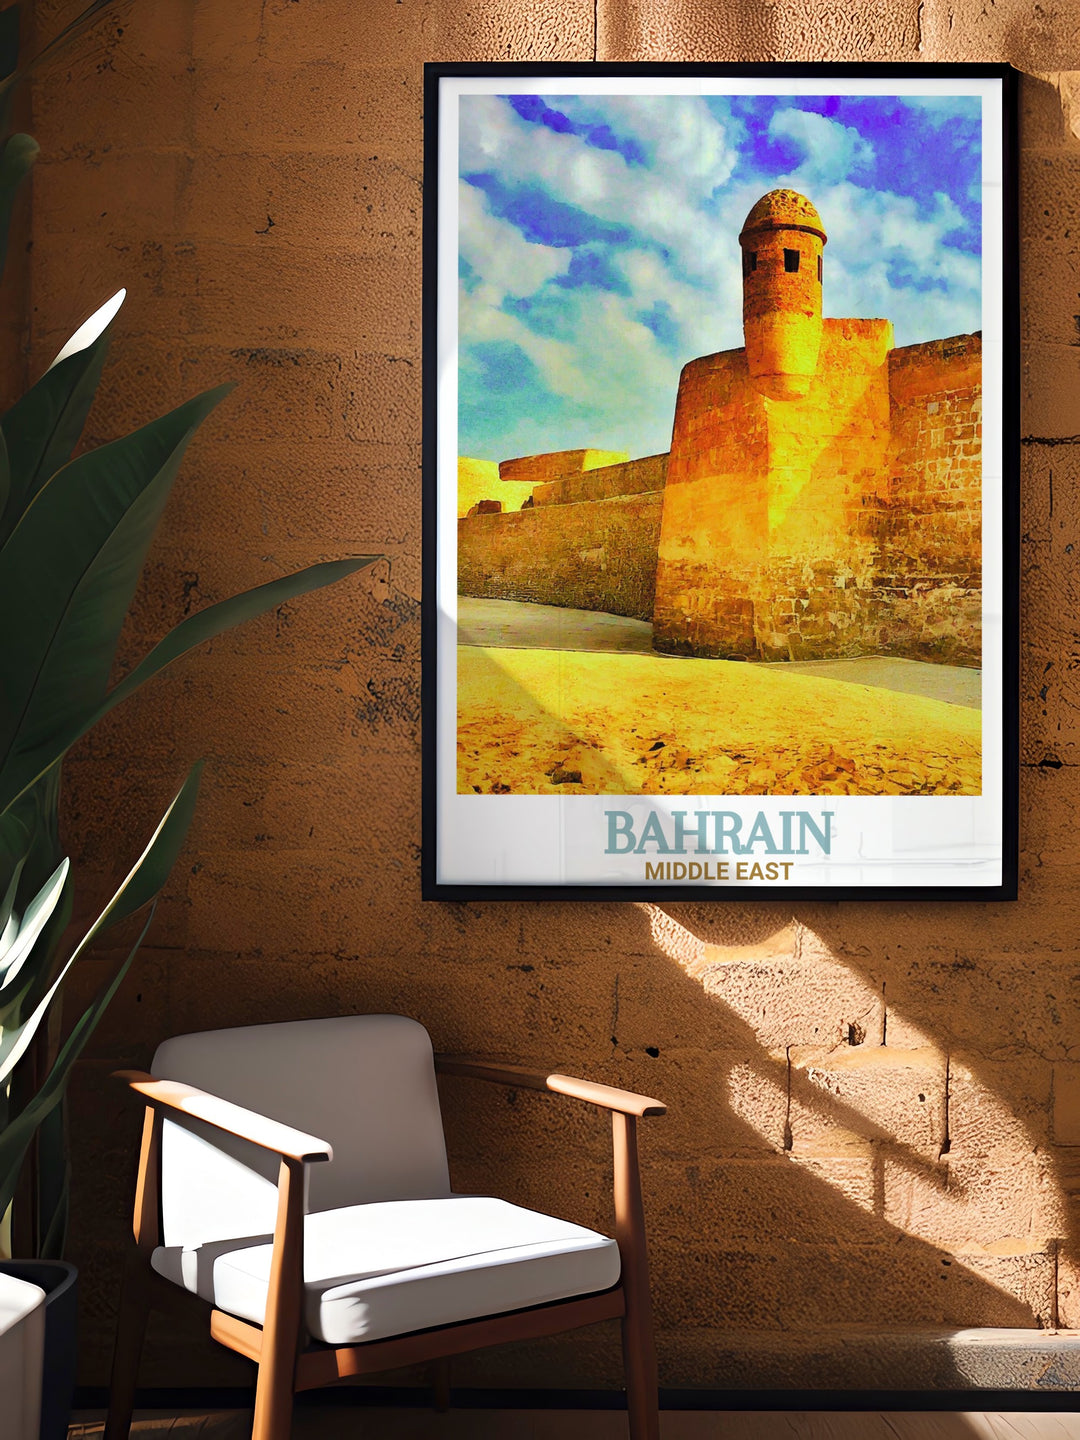 Bahrain Artwork showcasing the majestic Bahrain Fort an ideal piece for wall decor or a thoughtful gift for those who appreciate Middle Eastern art and history.